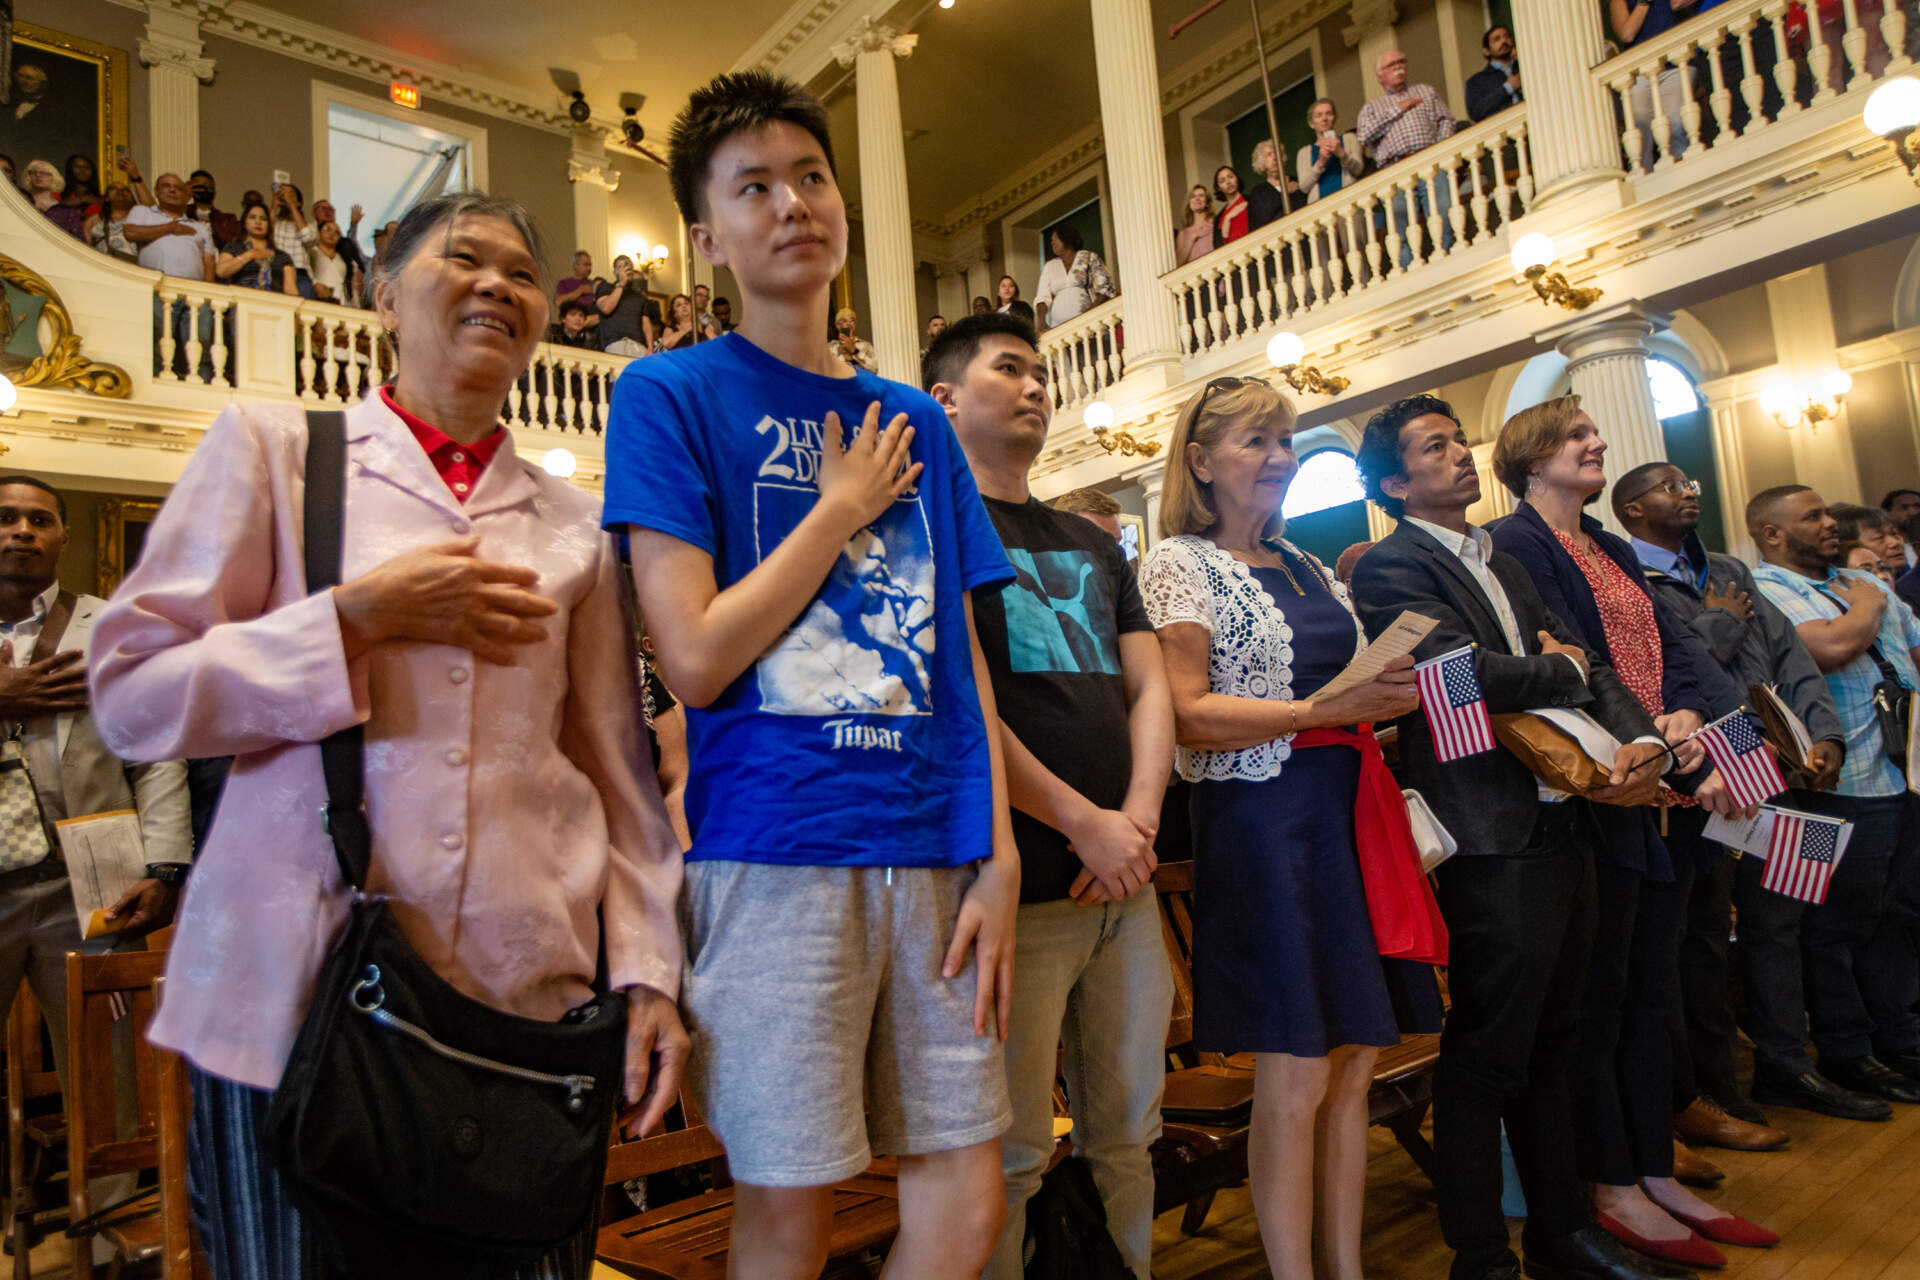 Naturalization applicants stand to recite the Pledge of Allegiance during a naturalization ceremony at Faneuil Hall. (Jesse Costa/WBUR)